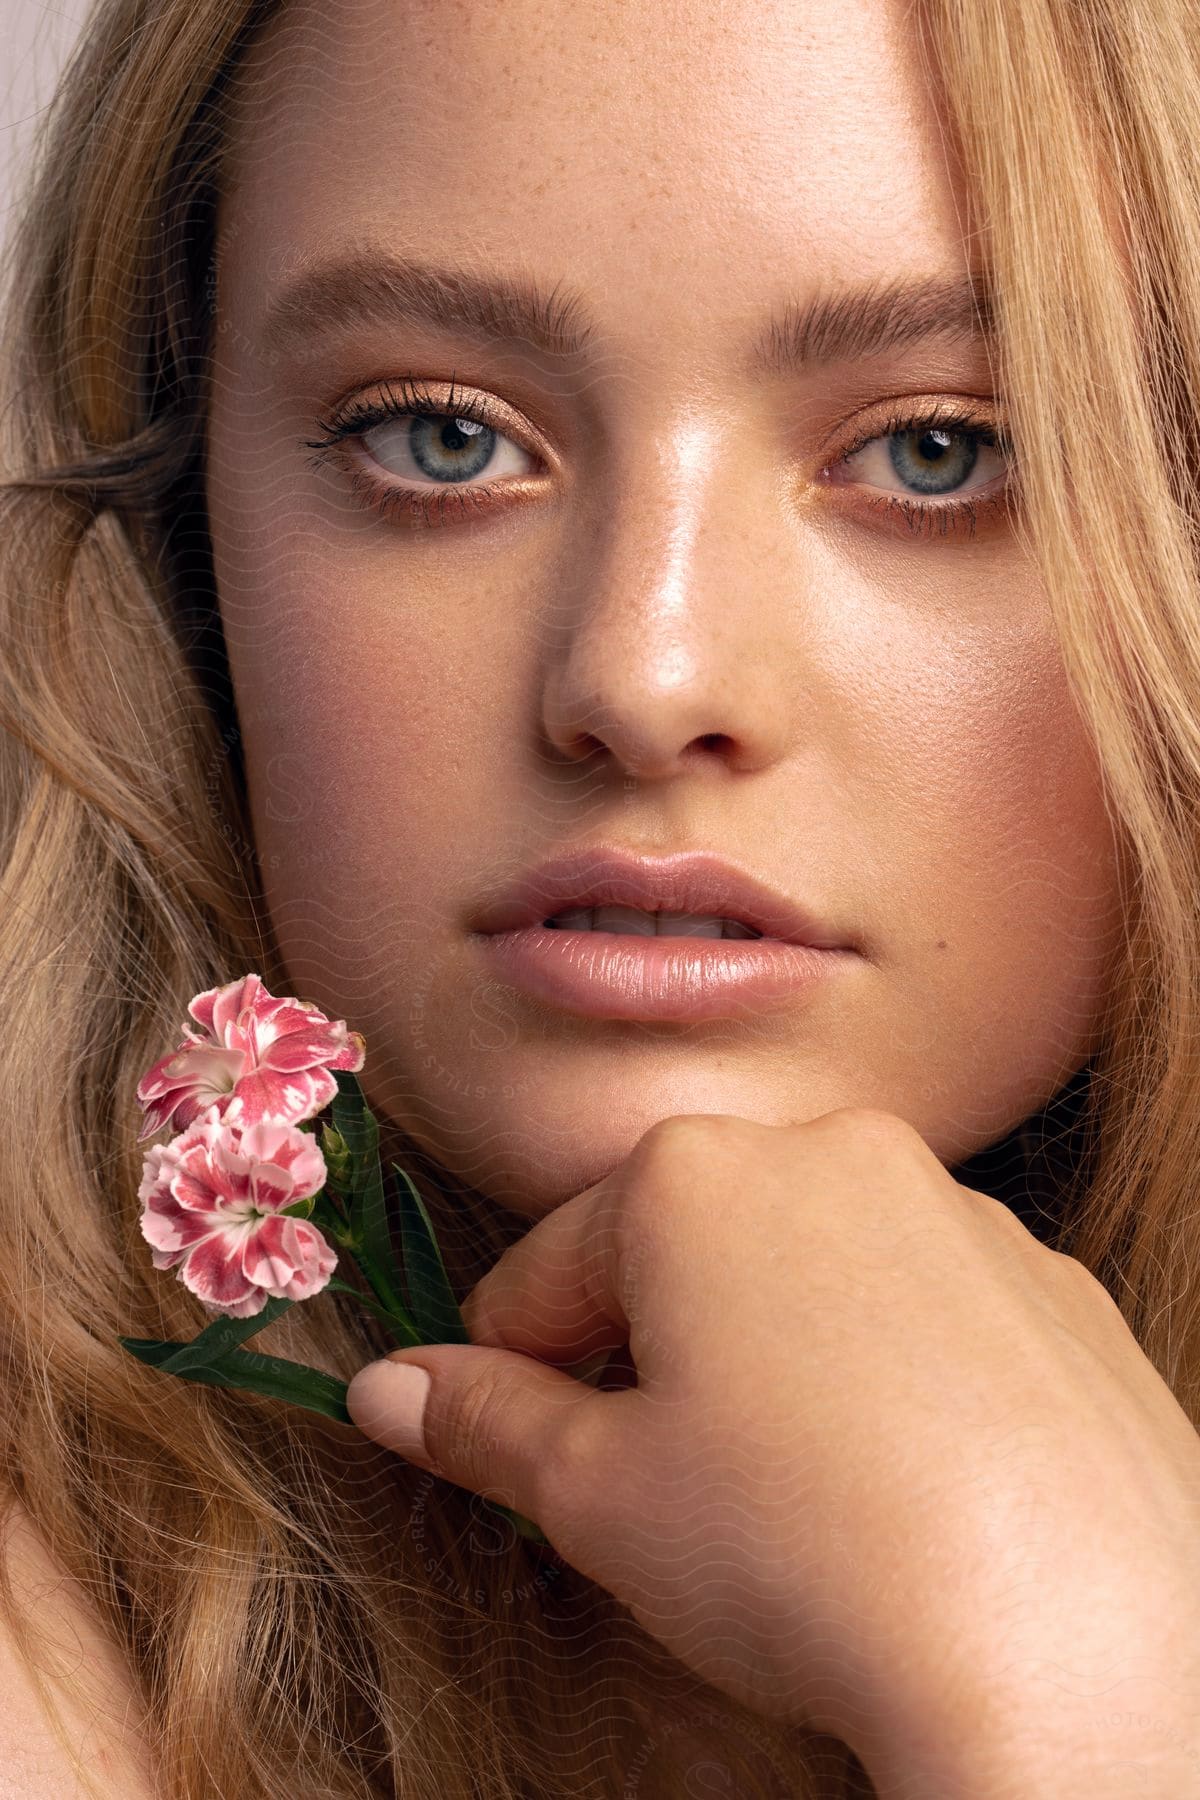 Close up of blonde woman’s face holding a clove pink